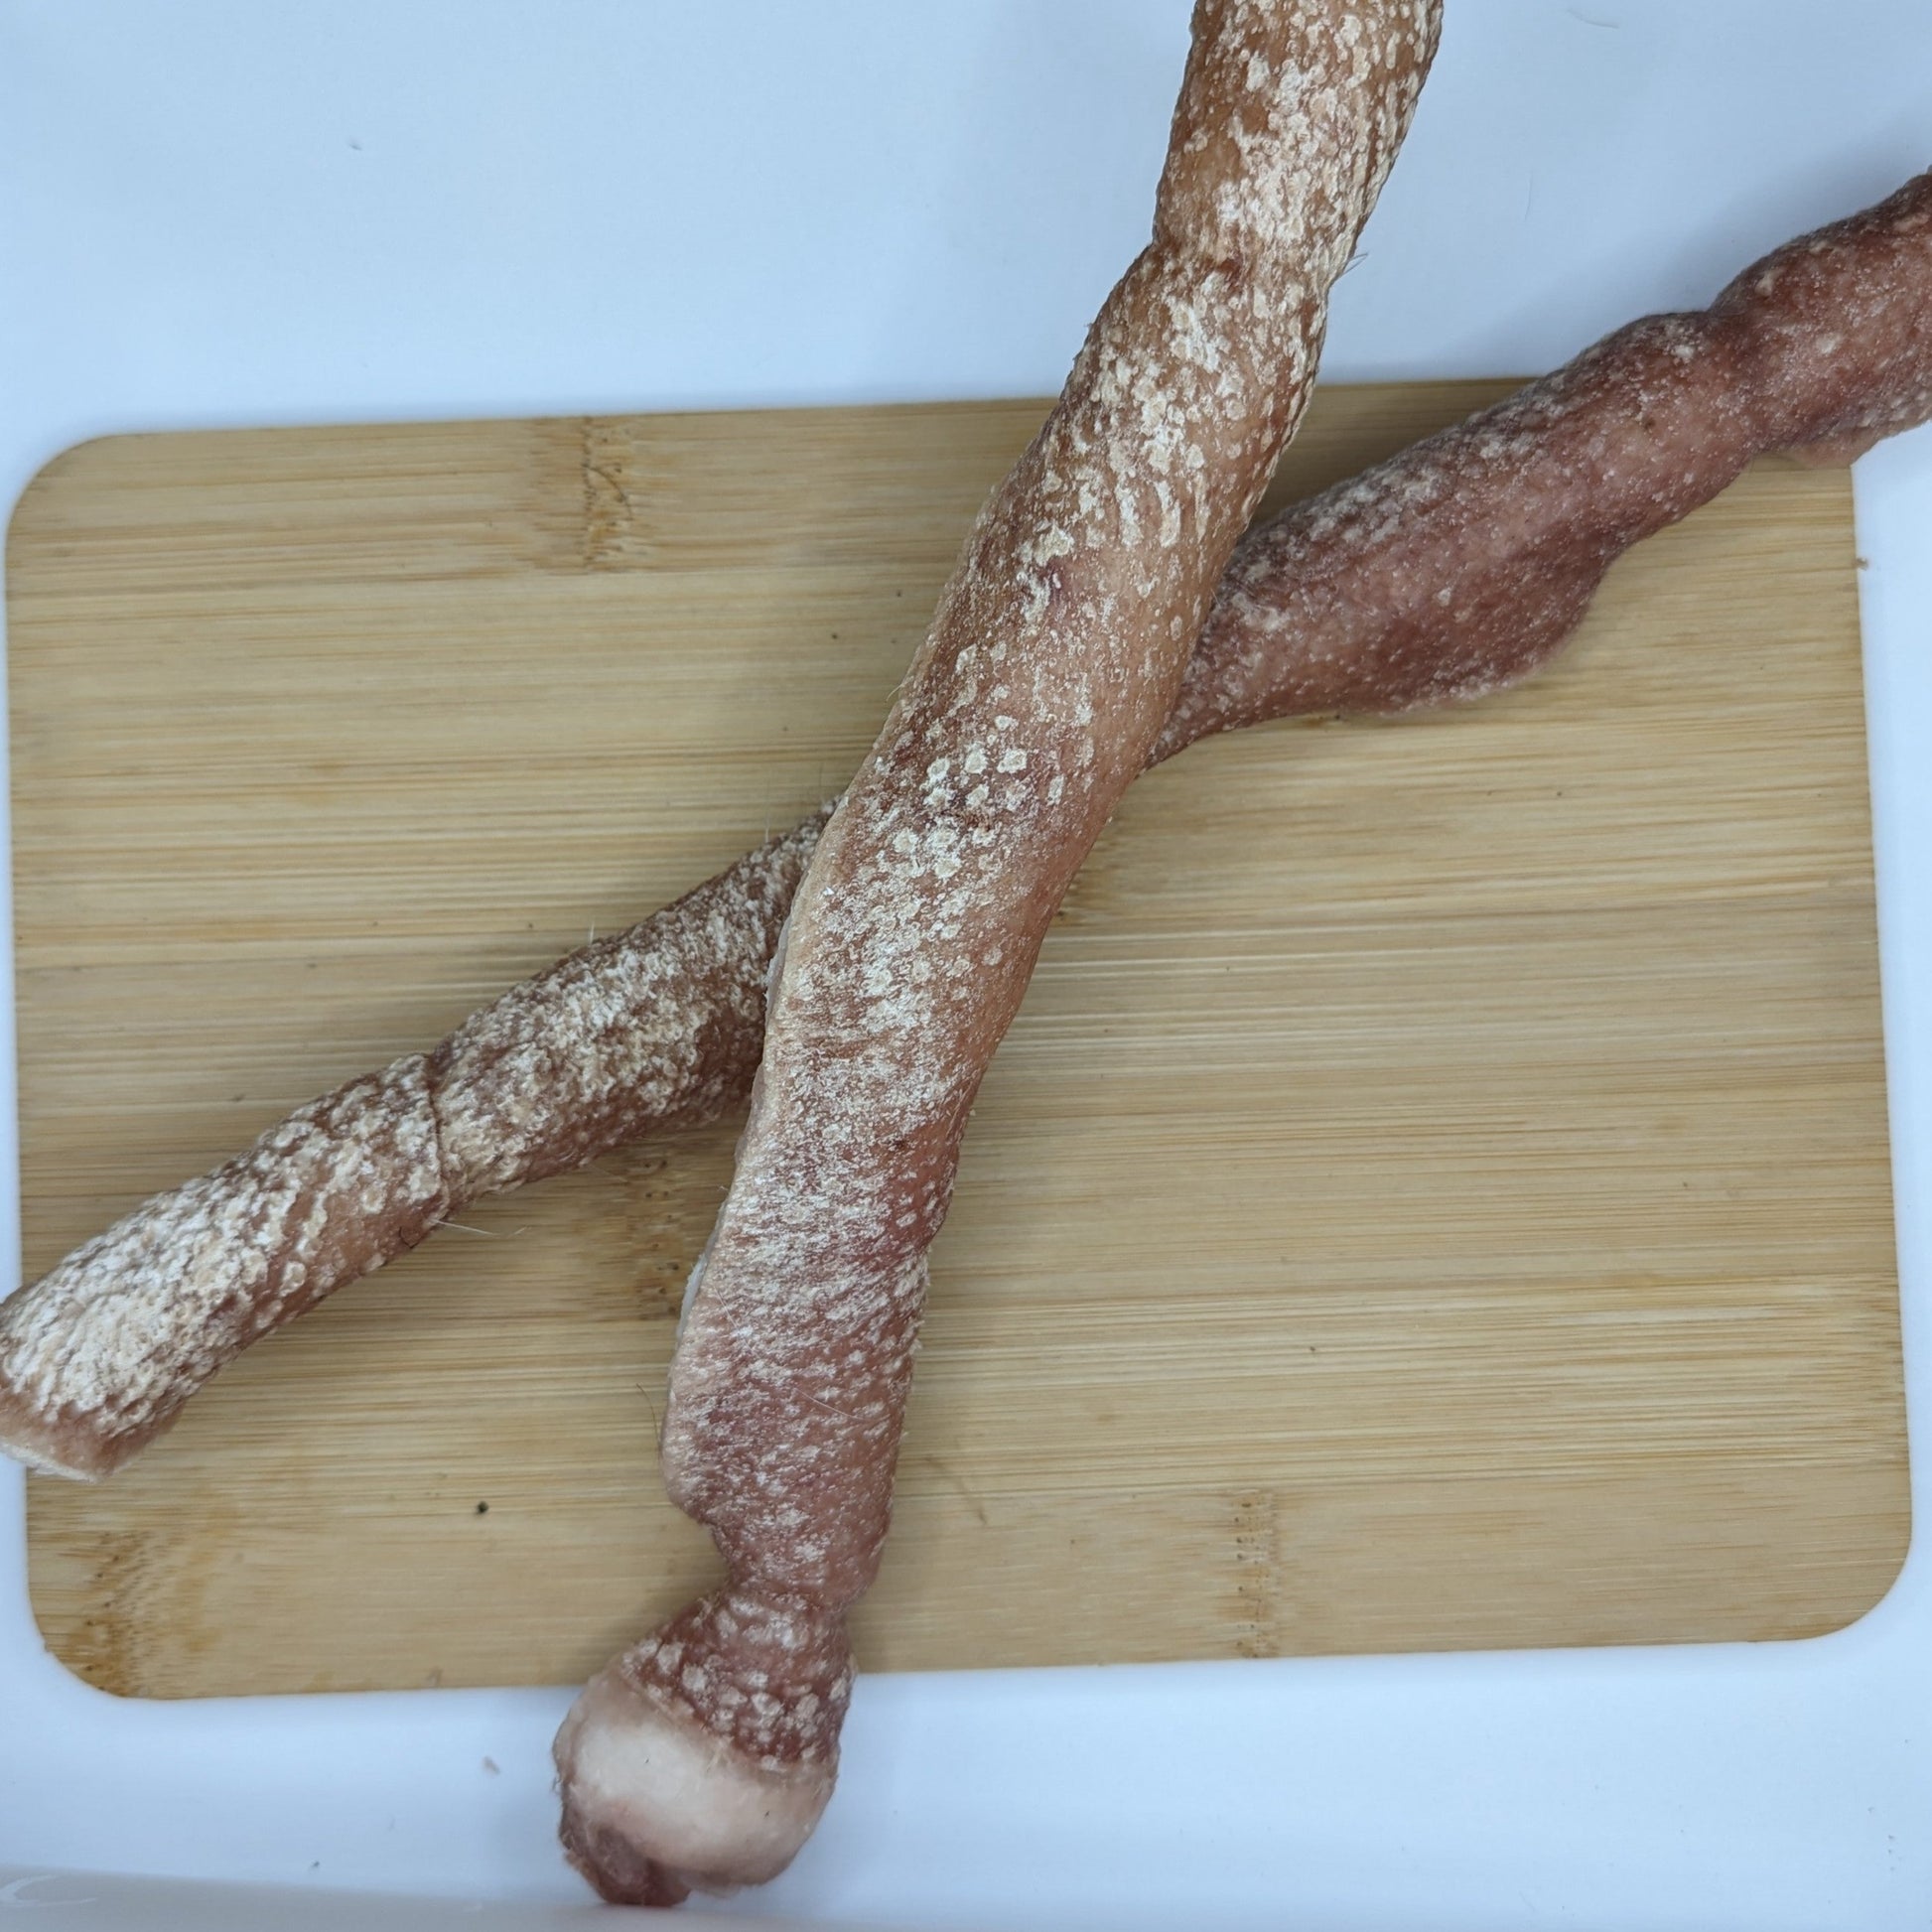 A wooden cutting board with two sticks on it is perfect for slicing Beast Feast's Heritage Breed Freeze-dried Pork Rolls.